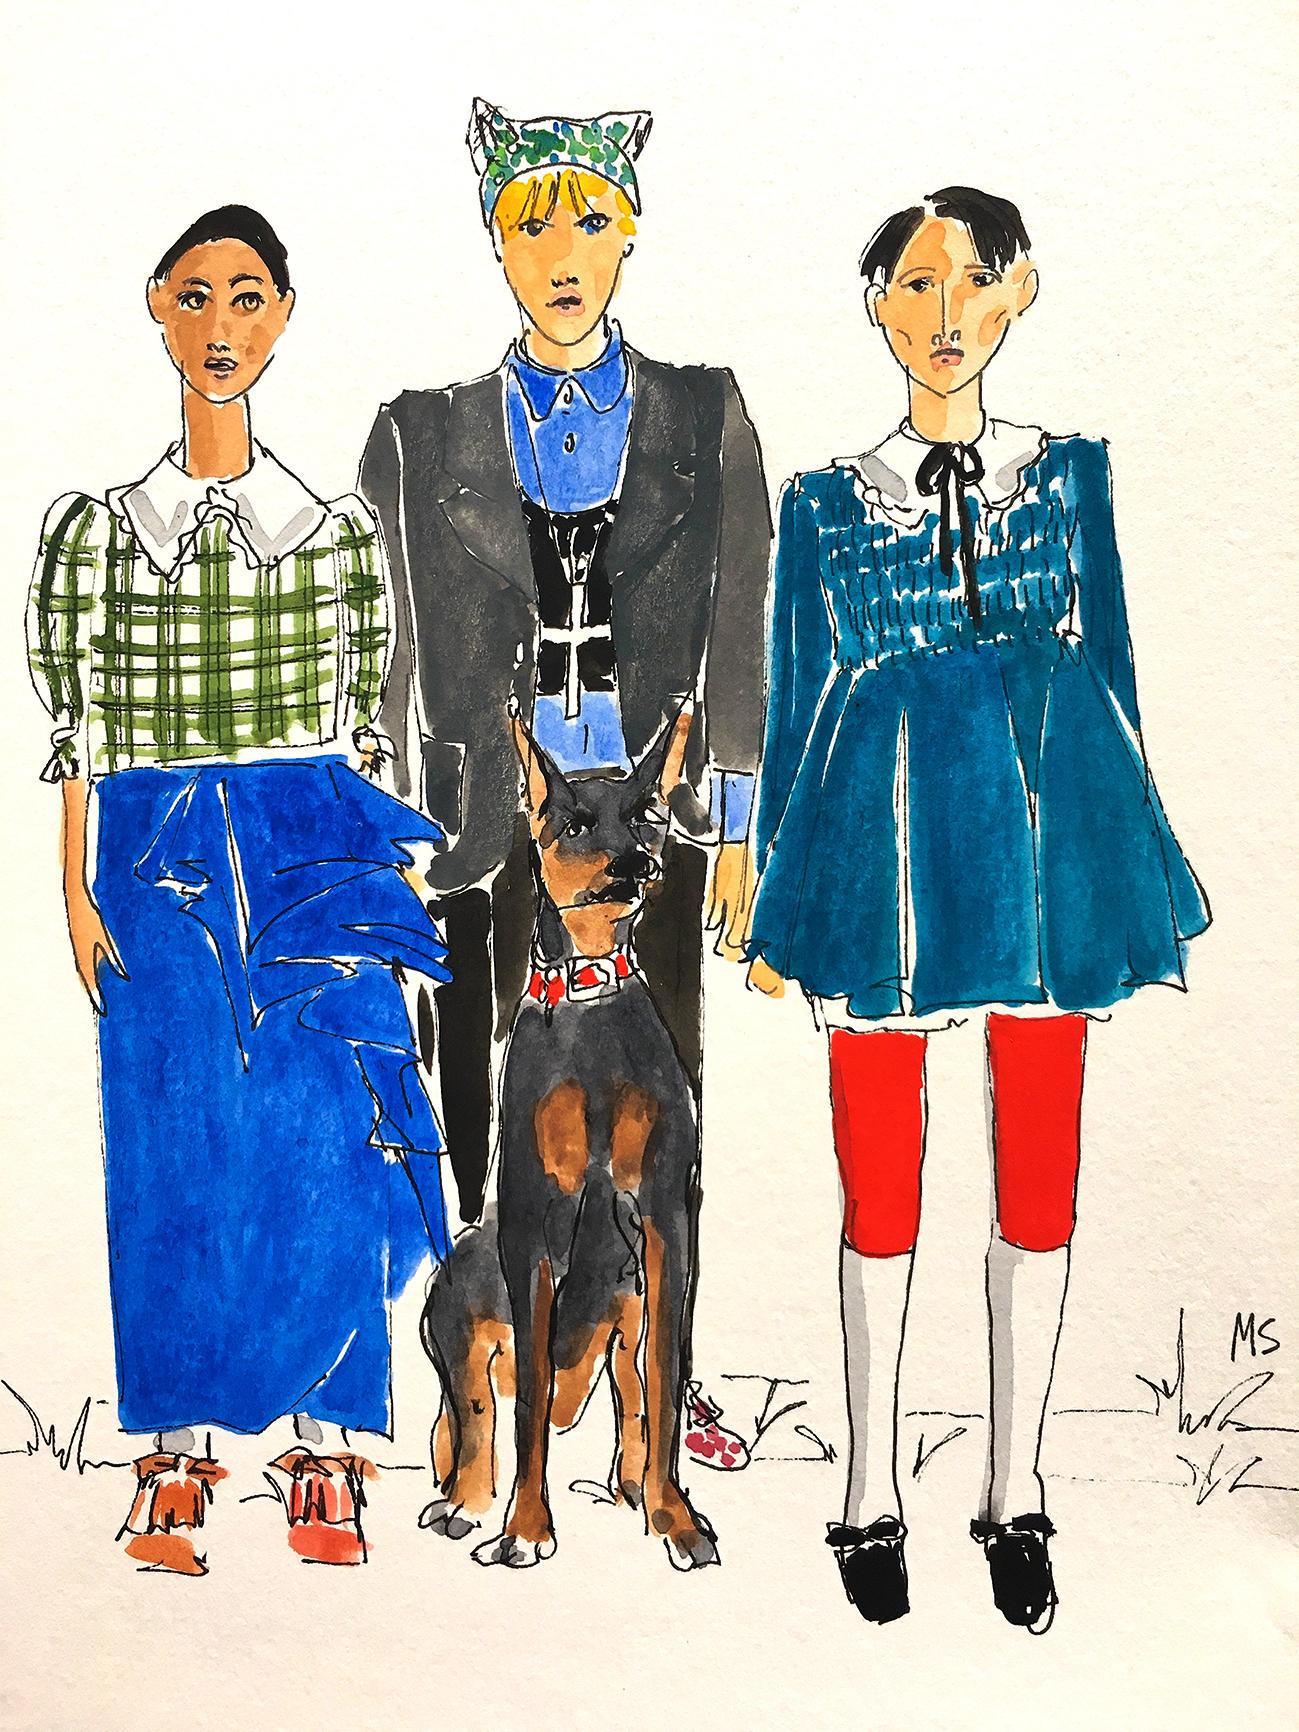 Manuel Santelices Still-Life - Gucci Fall, Fashion show models 2020. Watercolor fashion drawing on paper